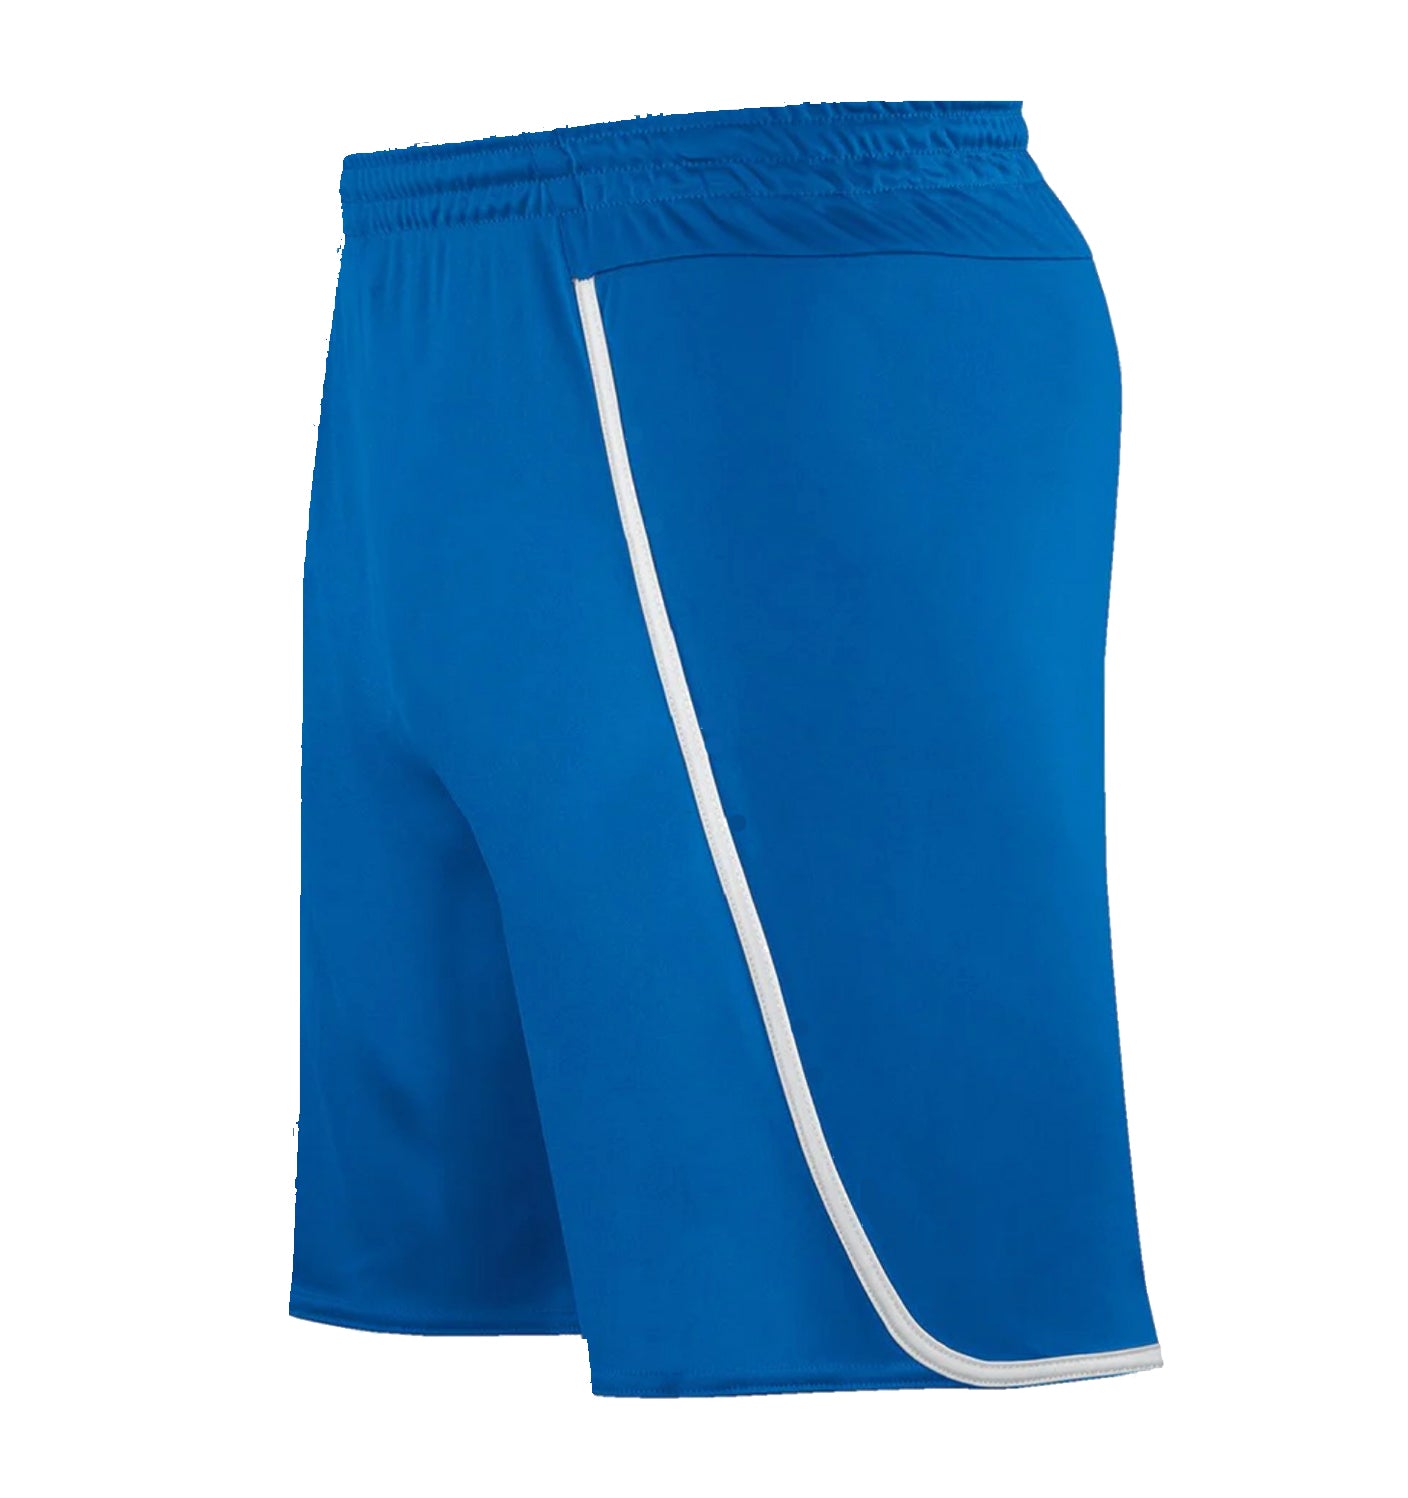 Pacific Soccer Shorts - Adult - Youth Sports Products